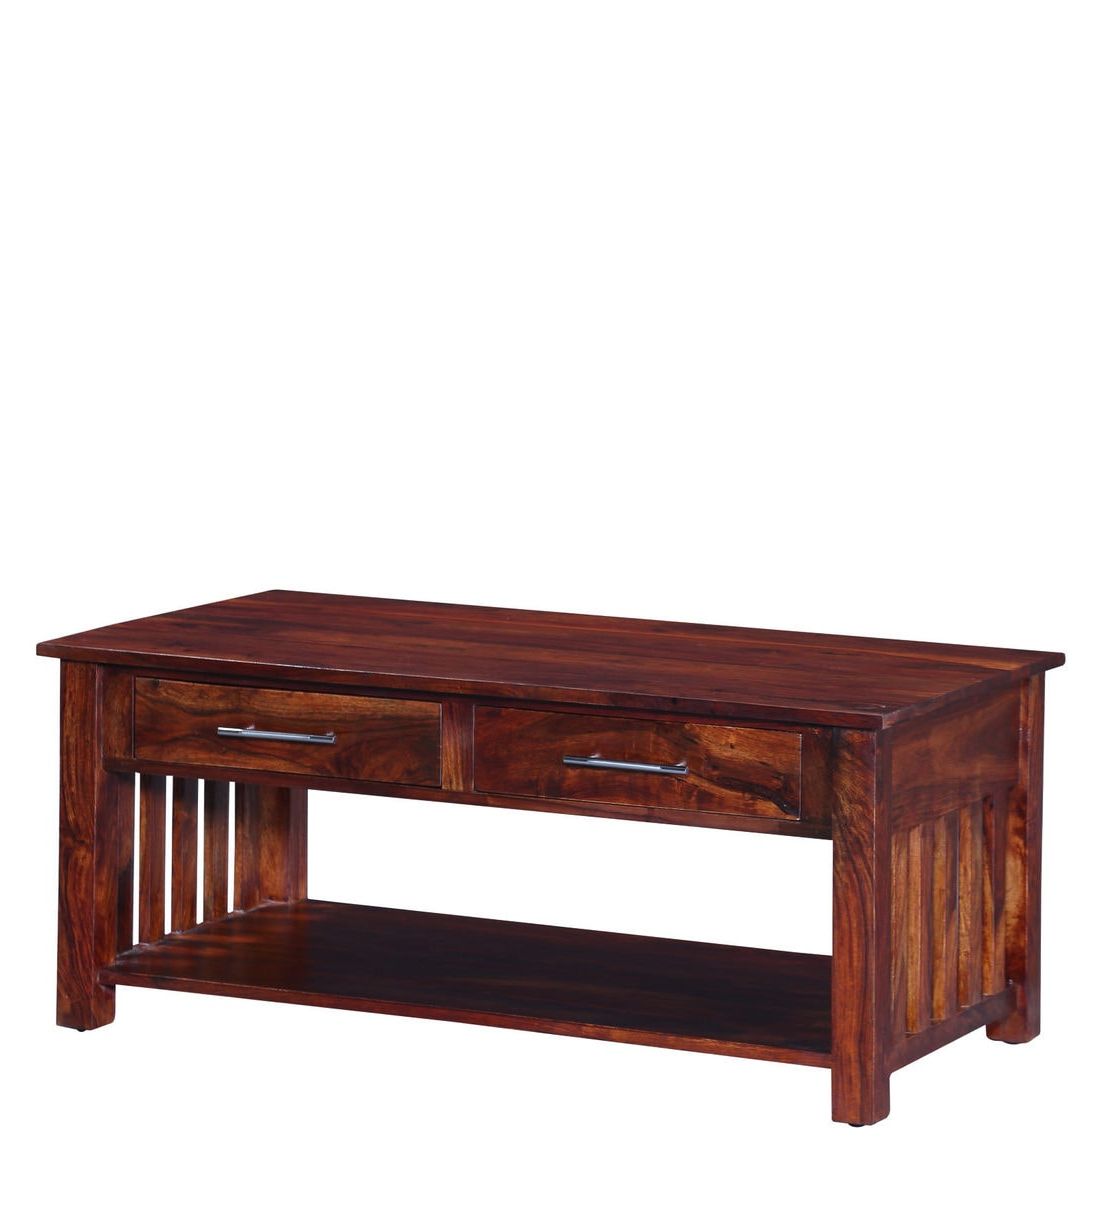 2019 Honey Oak And Marble Coffee Tables Within Buy Abbey Solid Wood Coffee Table In Honey Oak Finish (View 7 of 20)